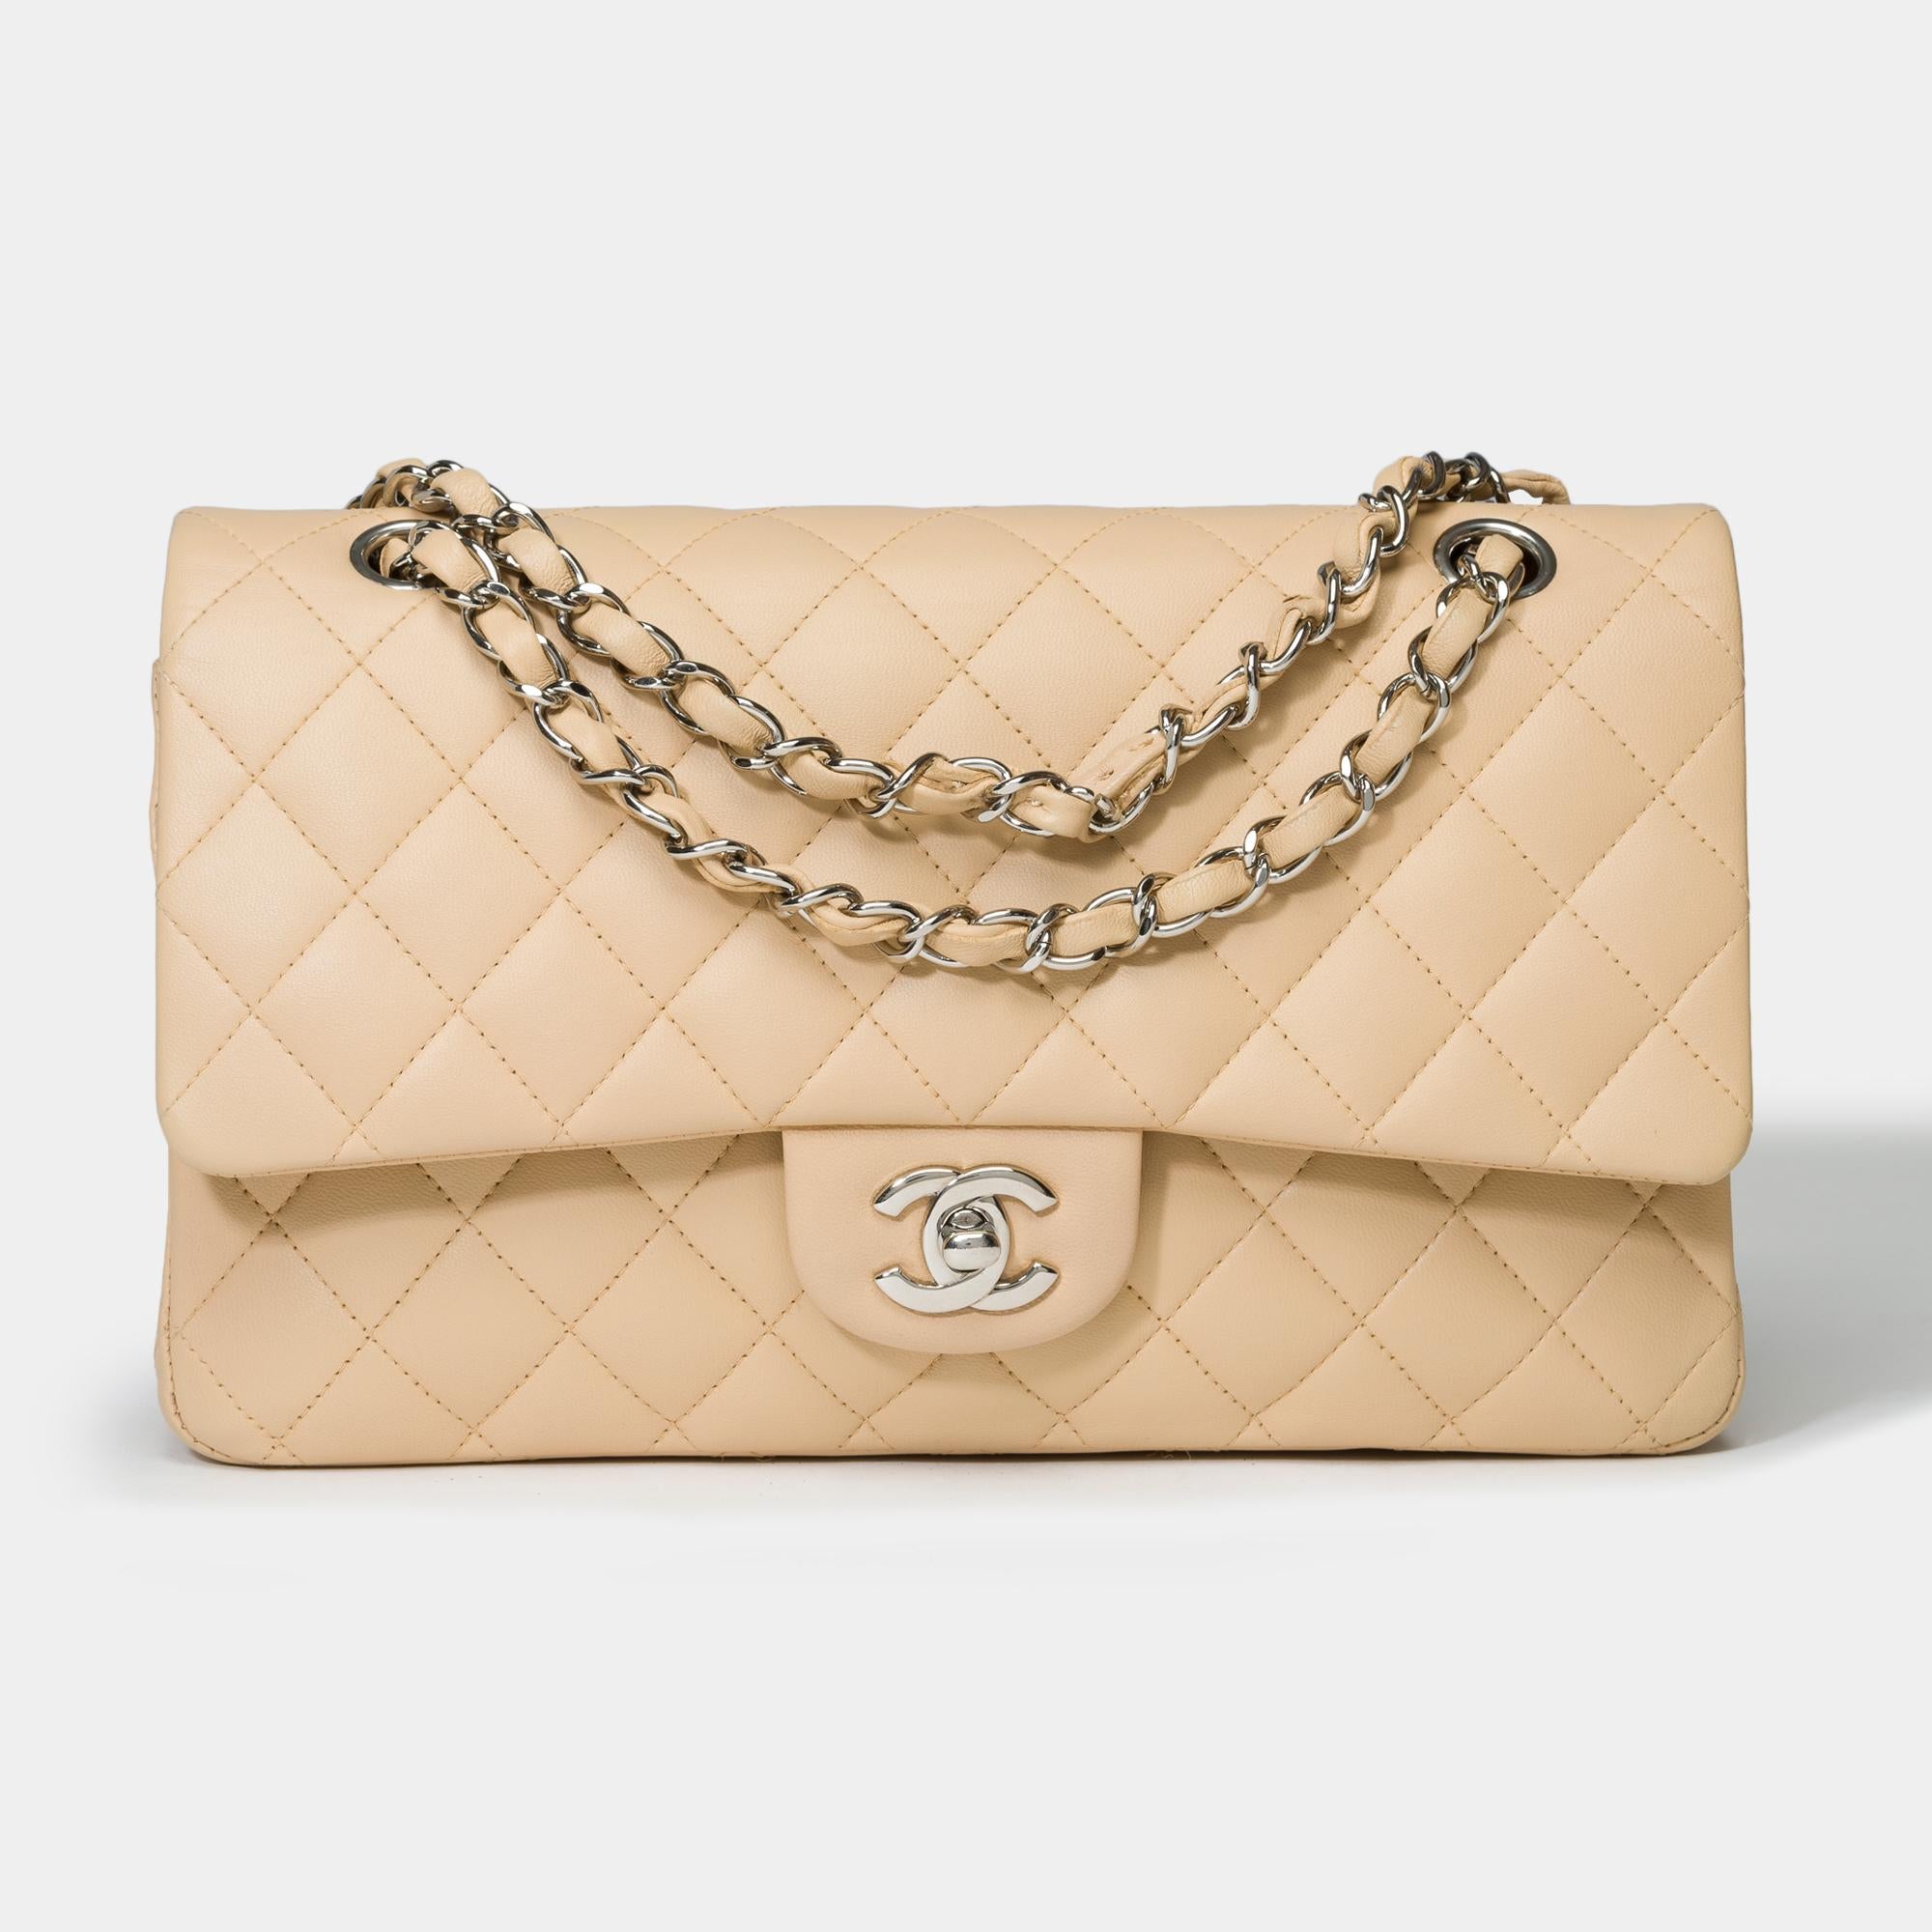 Stunning​ ​Chanel​ ​Timeless​ ​Medium​ ​25cm​ ​double​ ​flap​ ​shoulder​ ​bag​ ​in​ ​beige​ ​quilted​ ​lambskin​ ​leather,​ ​silver​ ​metal​ ​trim​ ​,​ ​a​ ​chain​ ​in​ ​silver​ ​metal​ ​interlaced​ ​with​ ​beige​ ​leather​ ​allowing​ ​a​ ​hand​